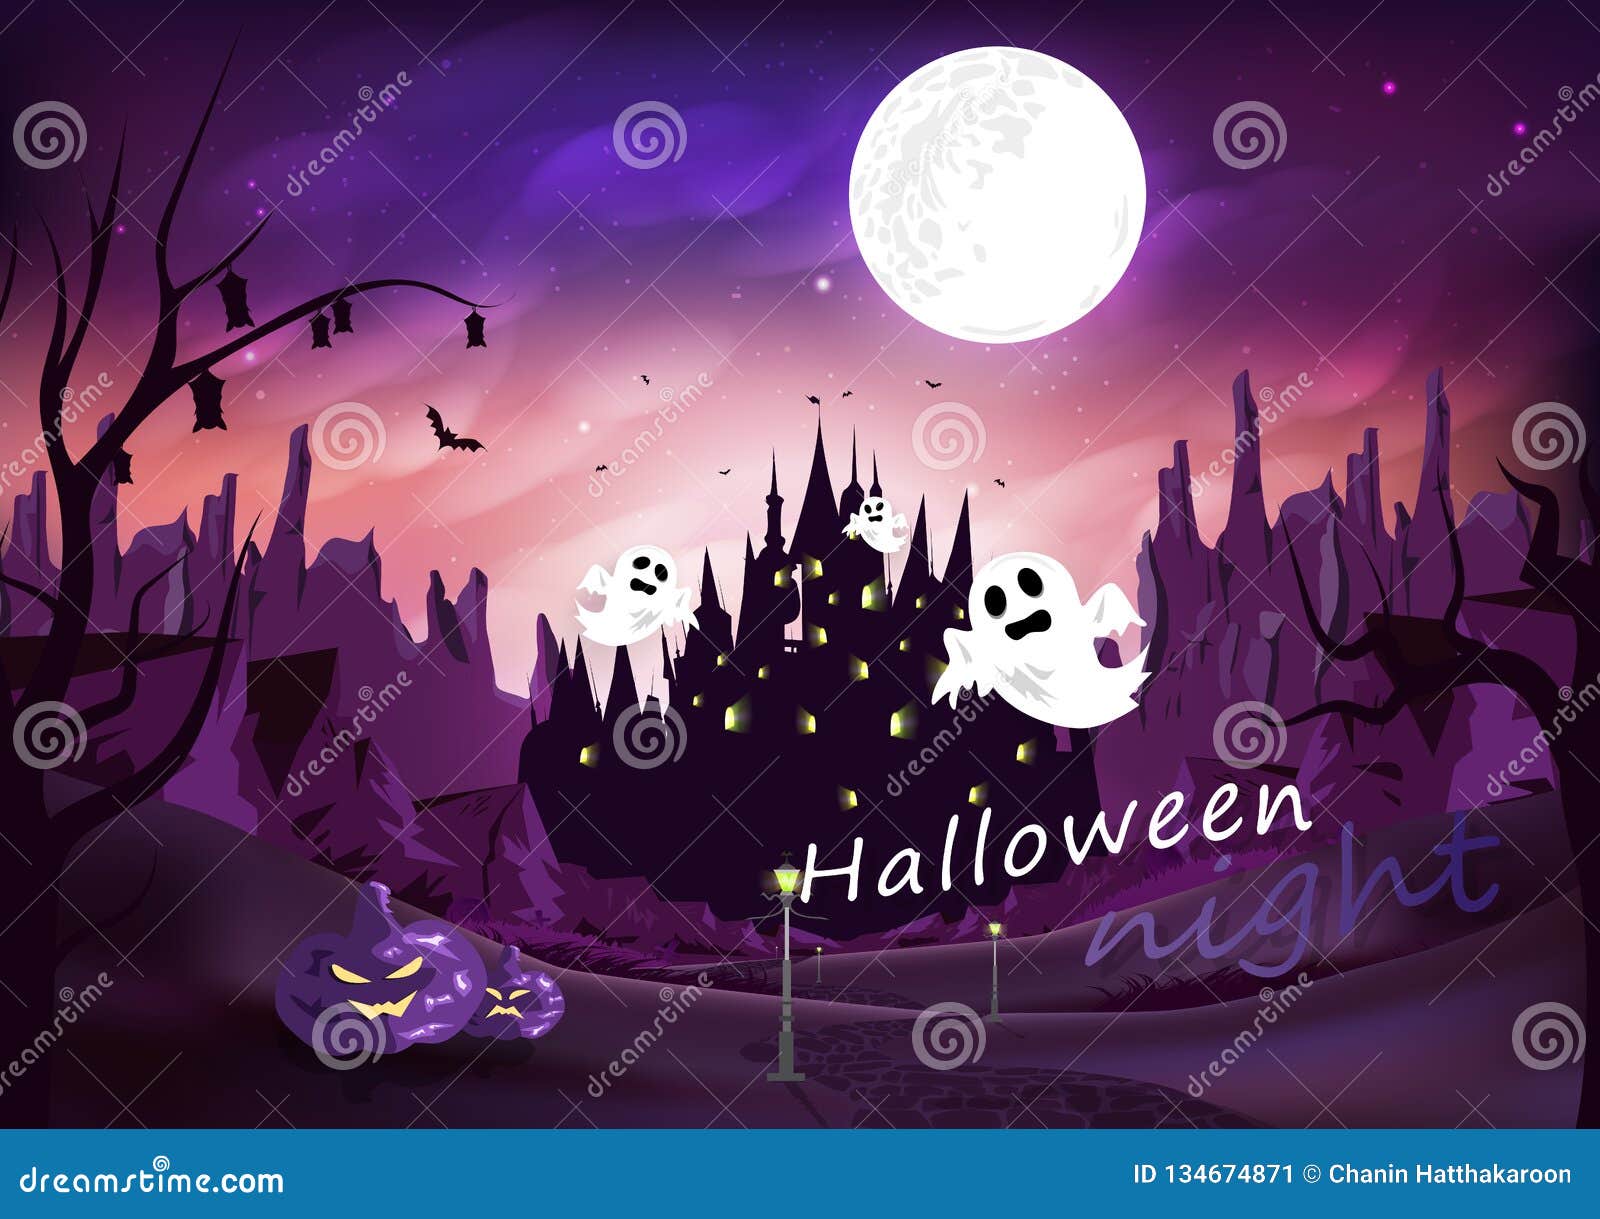 Halloween Poster Fantasy, Spooky and Pumkin on the Road with Castle,  Silhouette Night Scene Sky, Mountains Landscape Abstract Stock Vector -  Illustration of crow, mountain: 134674871